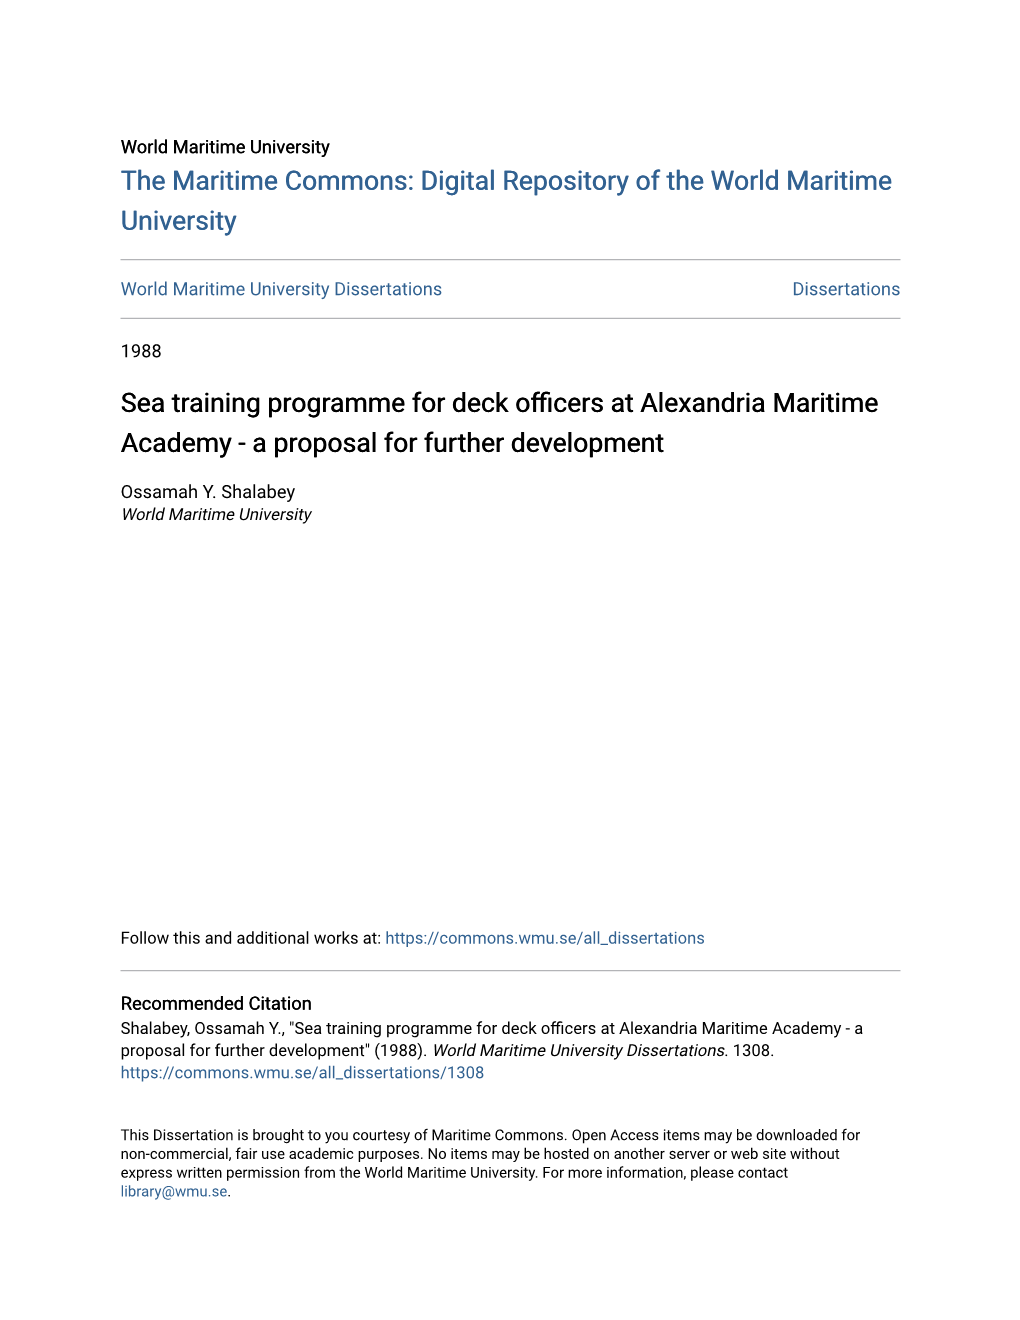 Sea Training Programme for Deck Officers at Alexandria Maritime Academy - a Proposal for Further Development